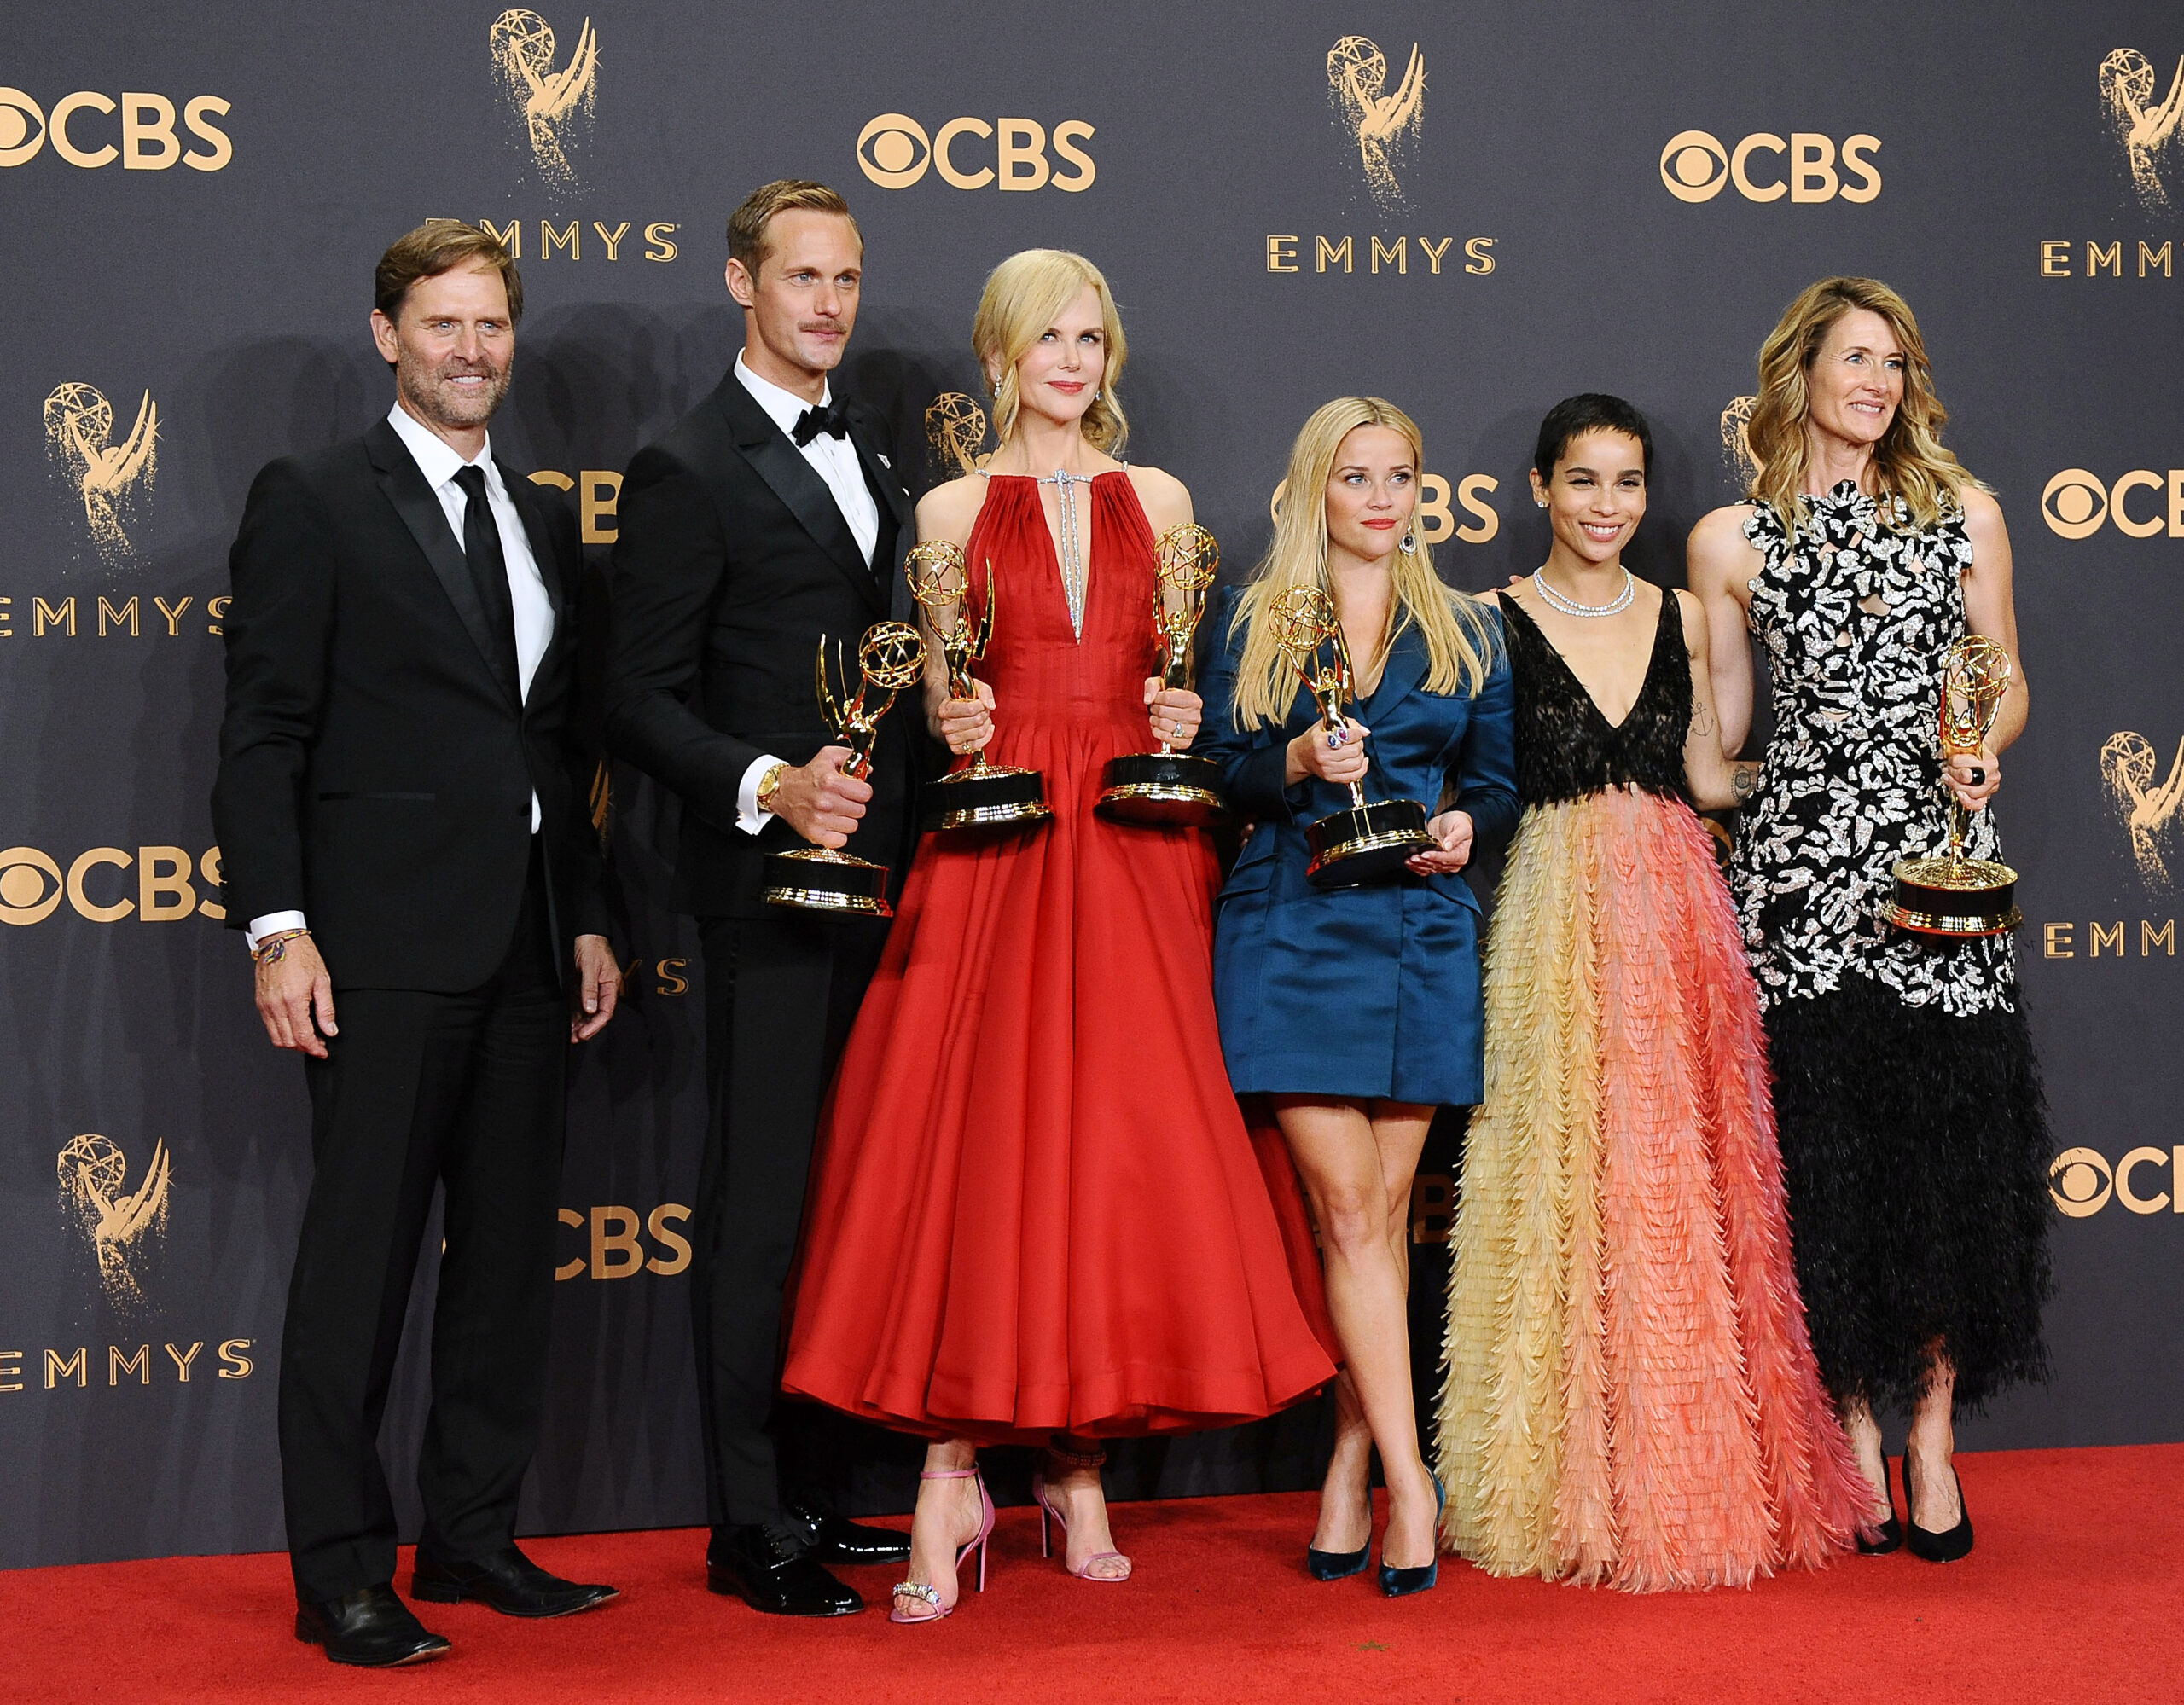 Big Little Lies is back for a second season